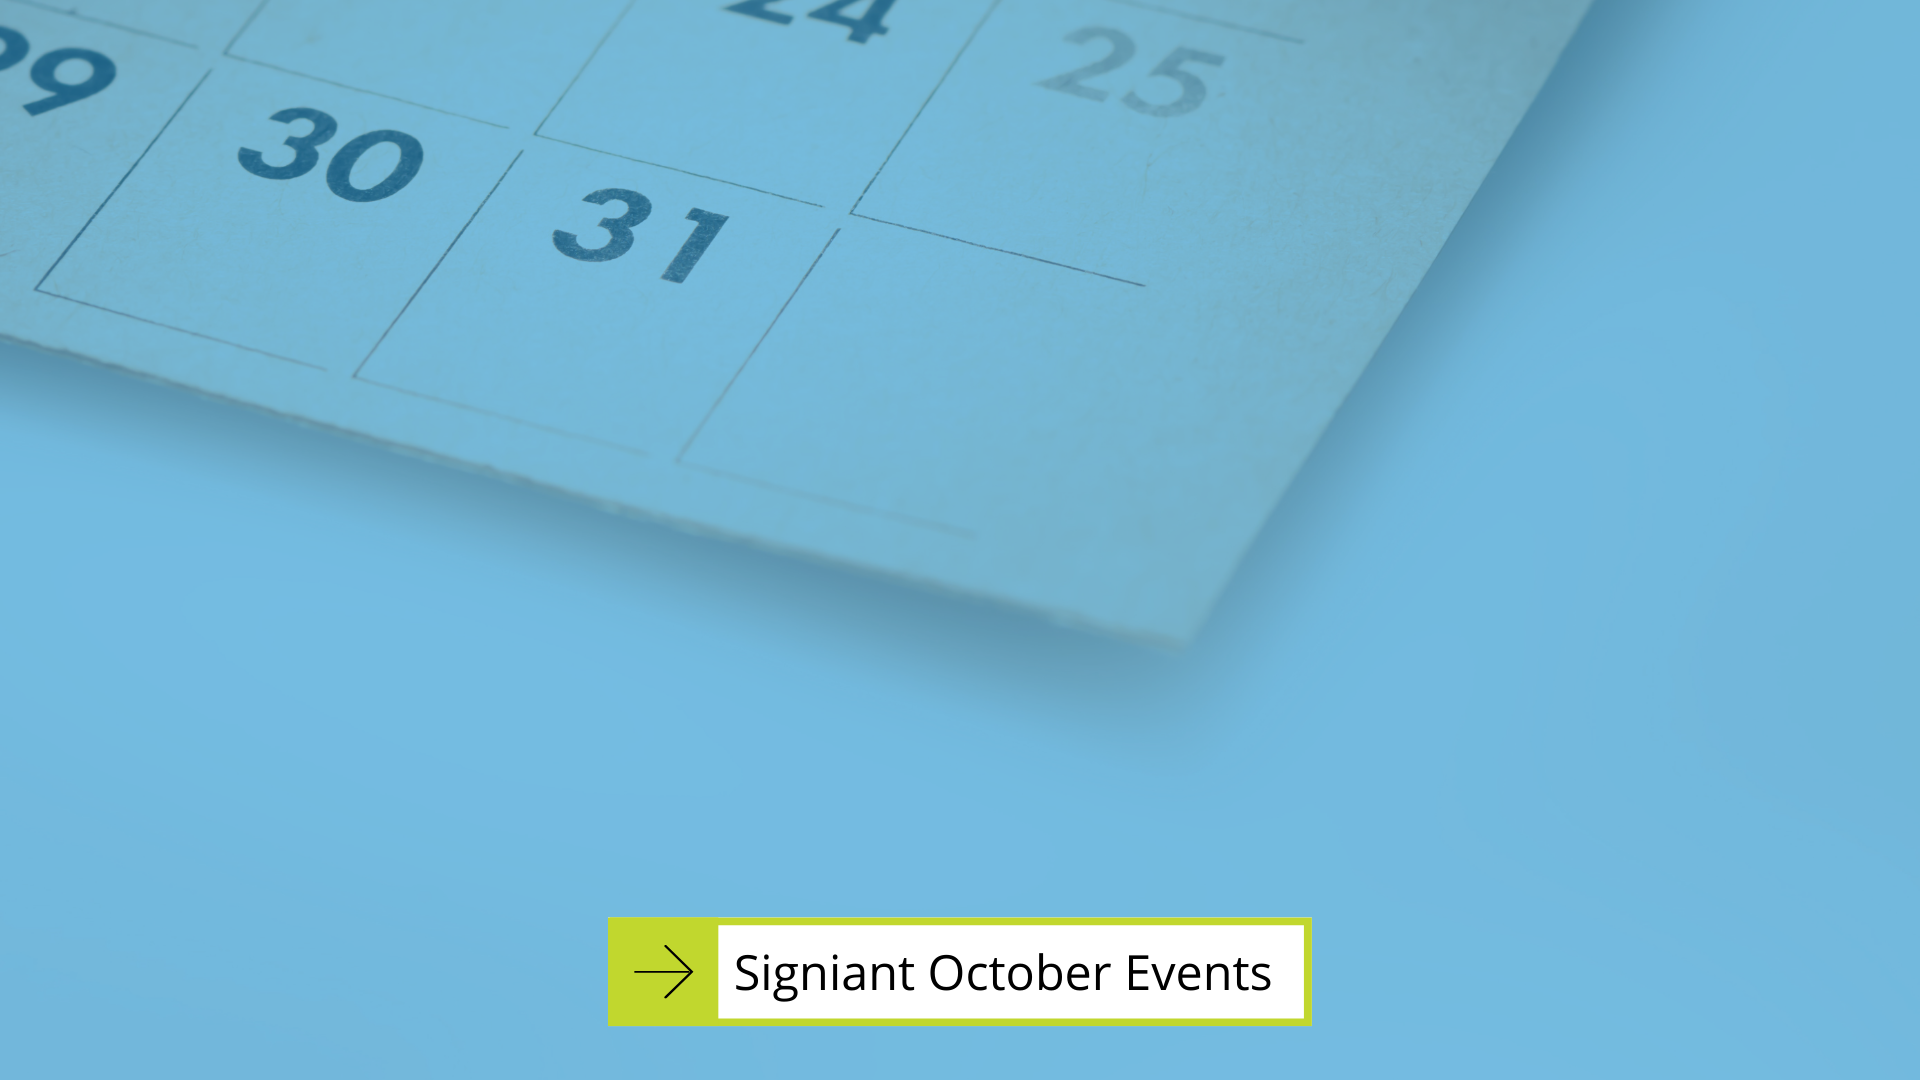 Signiant October Events with zoomed in calendar in blue background